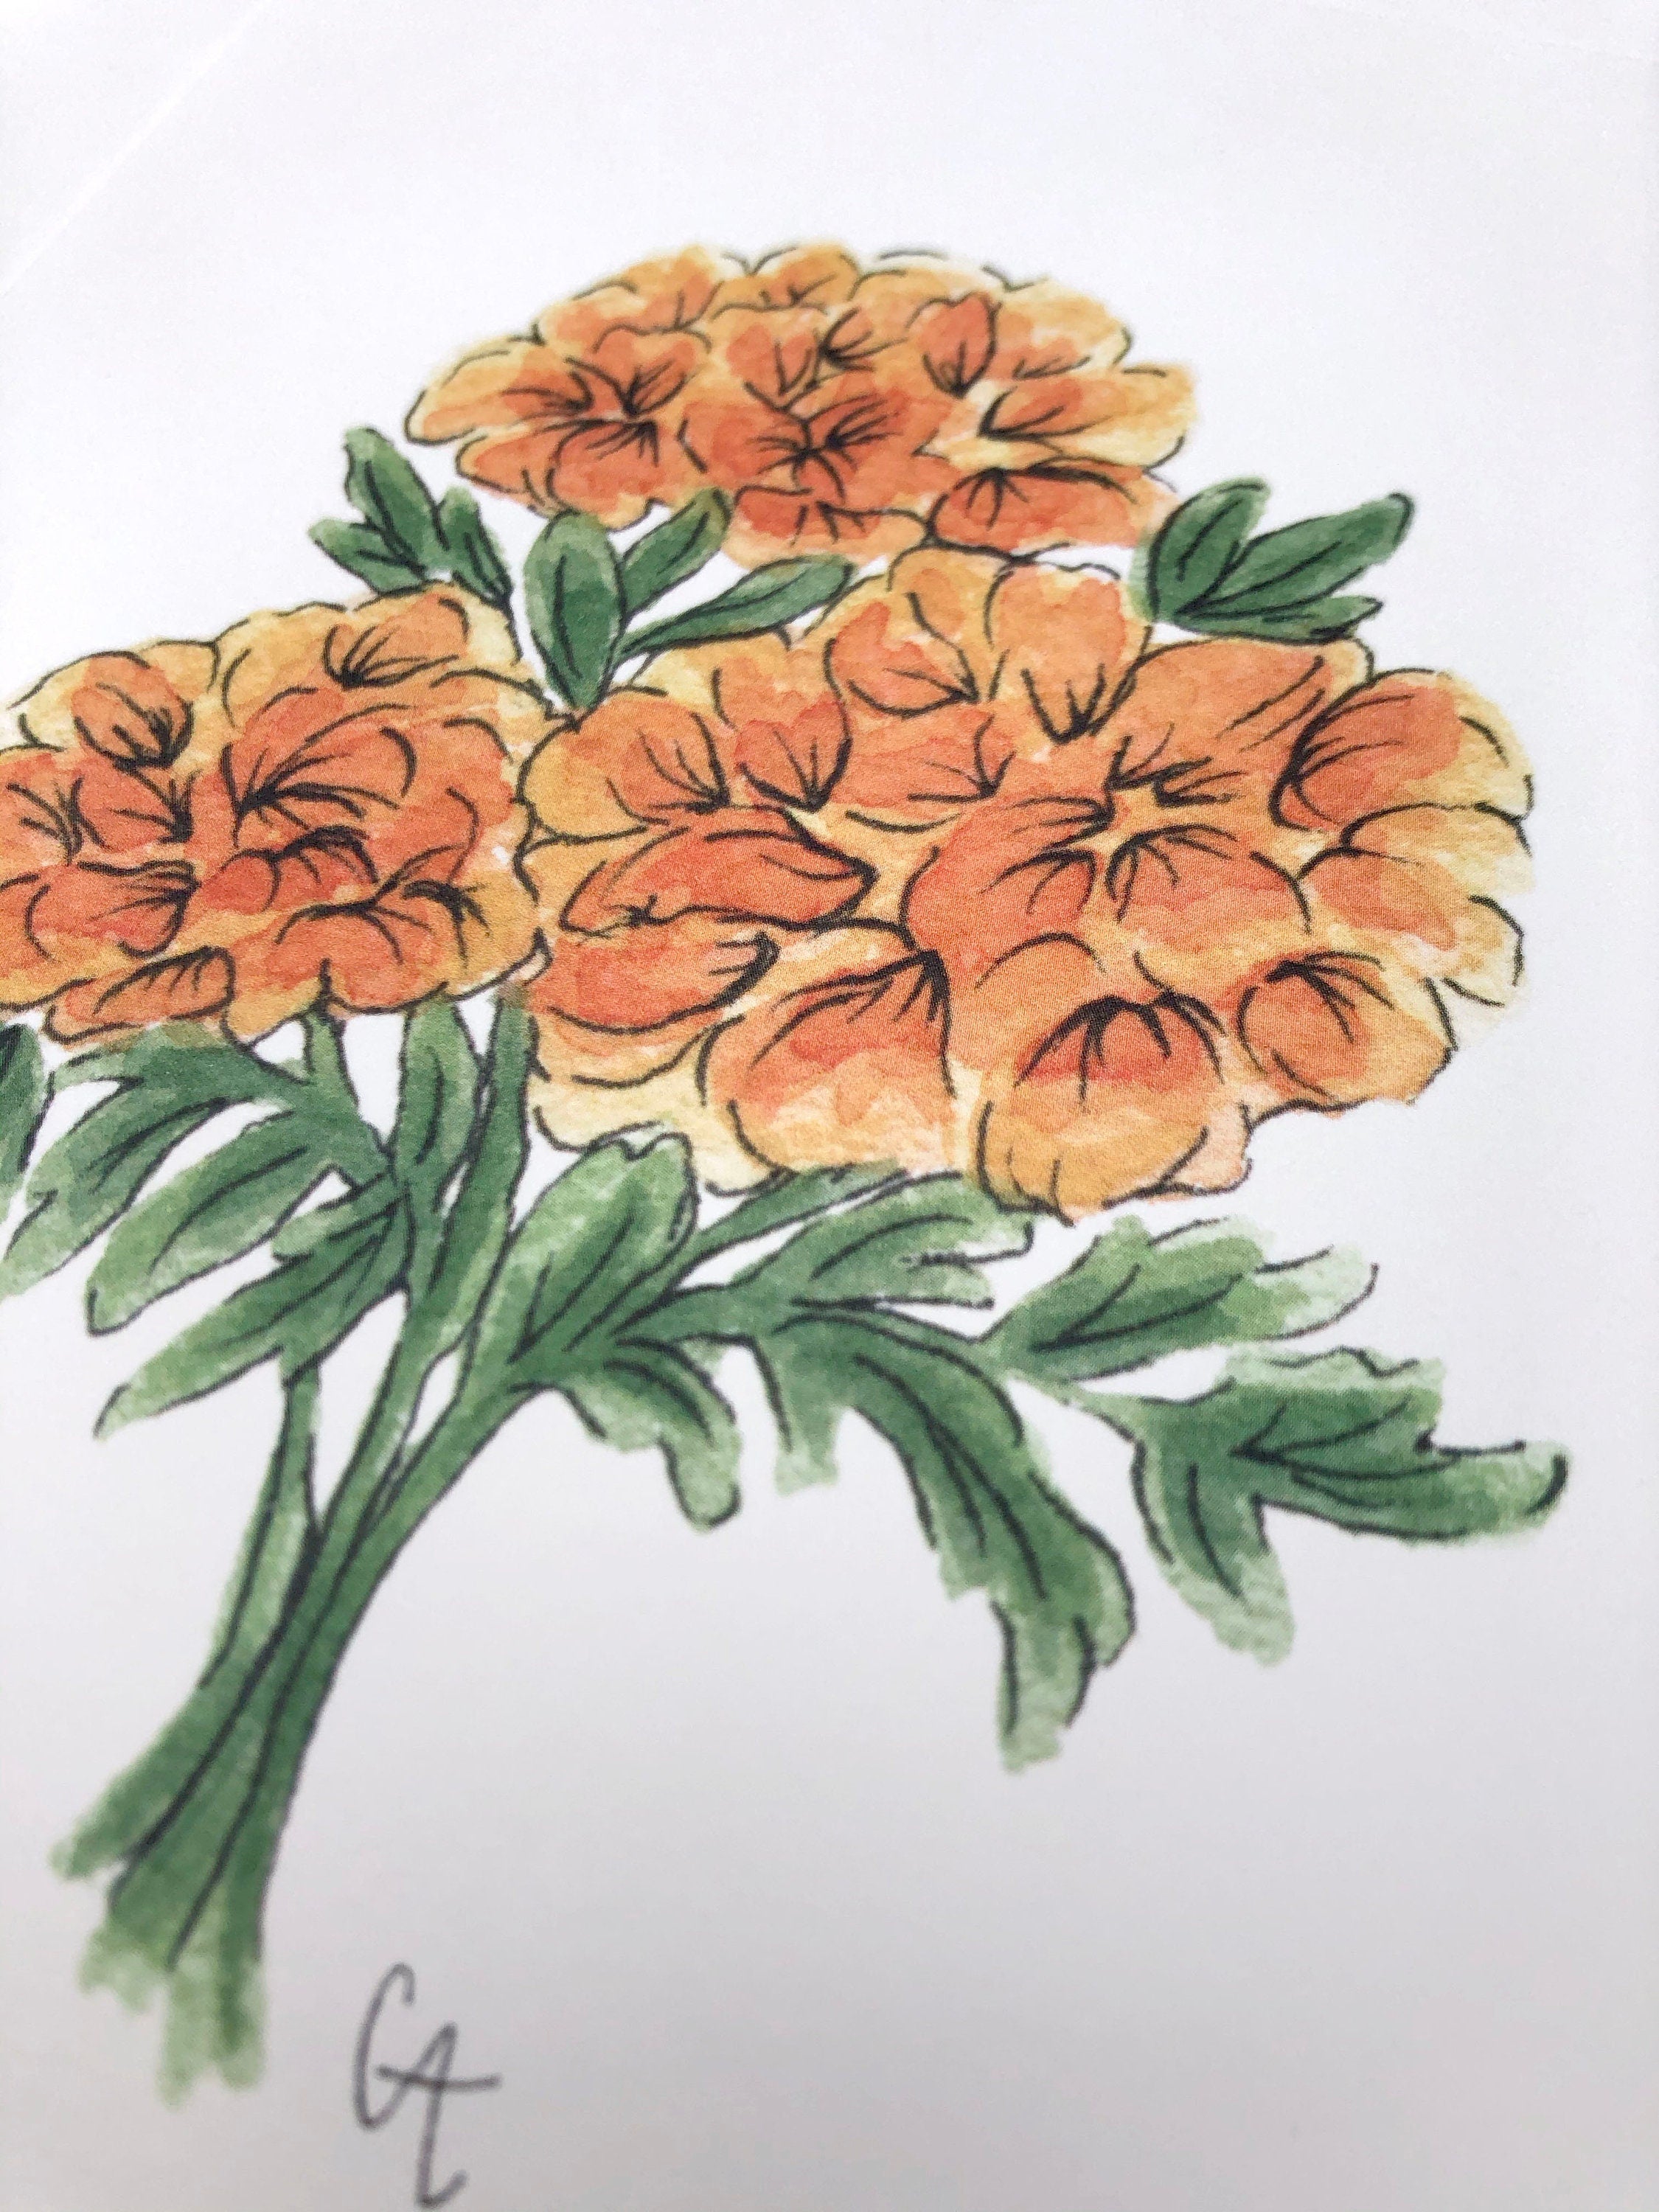 Marigold Flowers - Floral Design - Posters and Art Prints | TeePublic